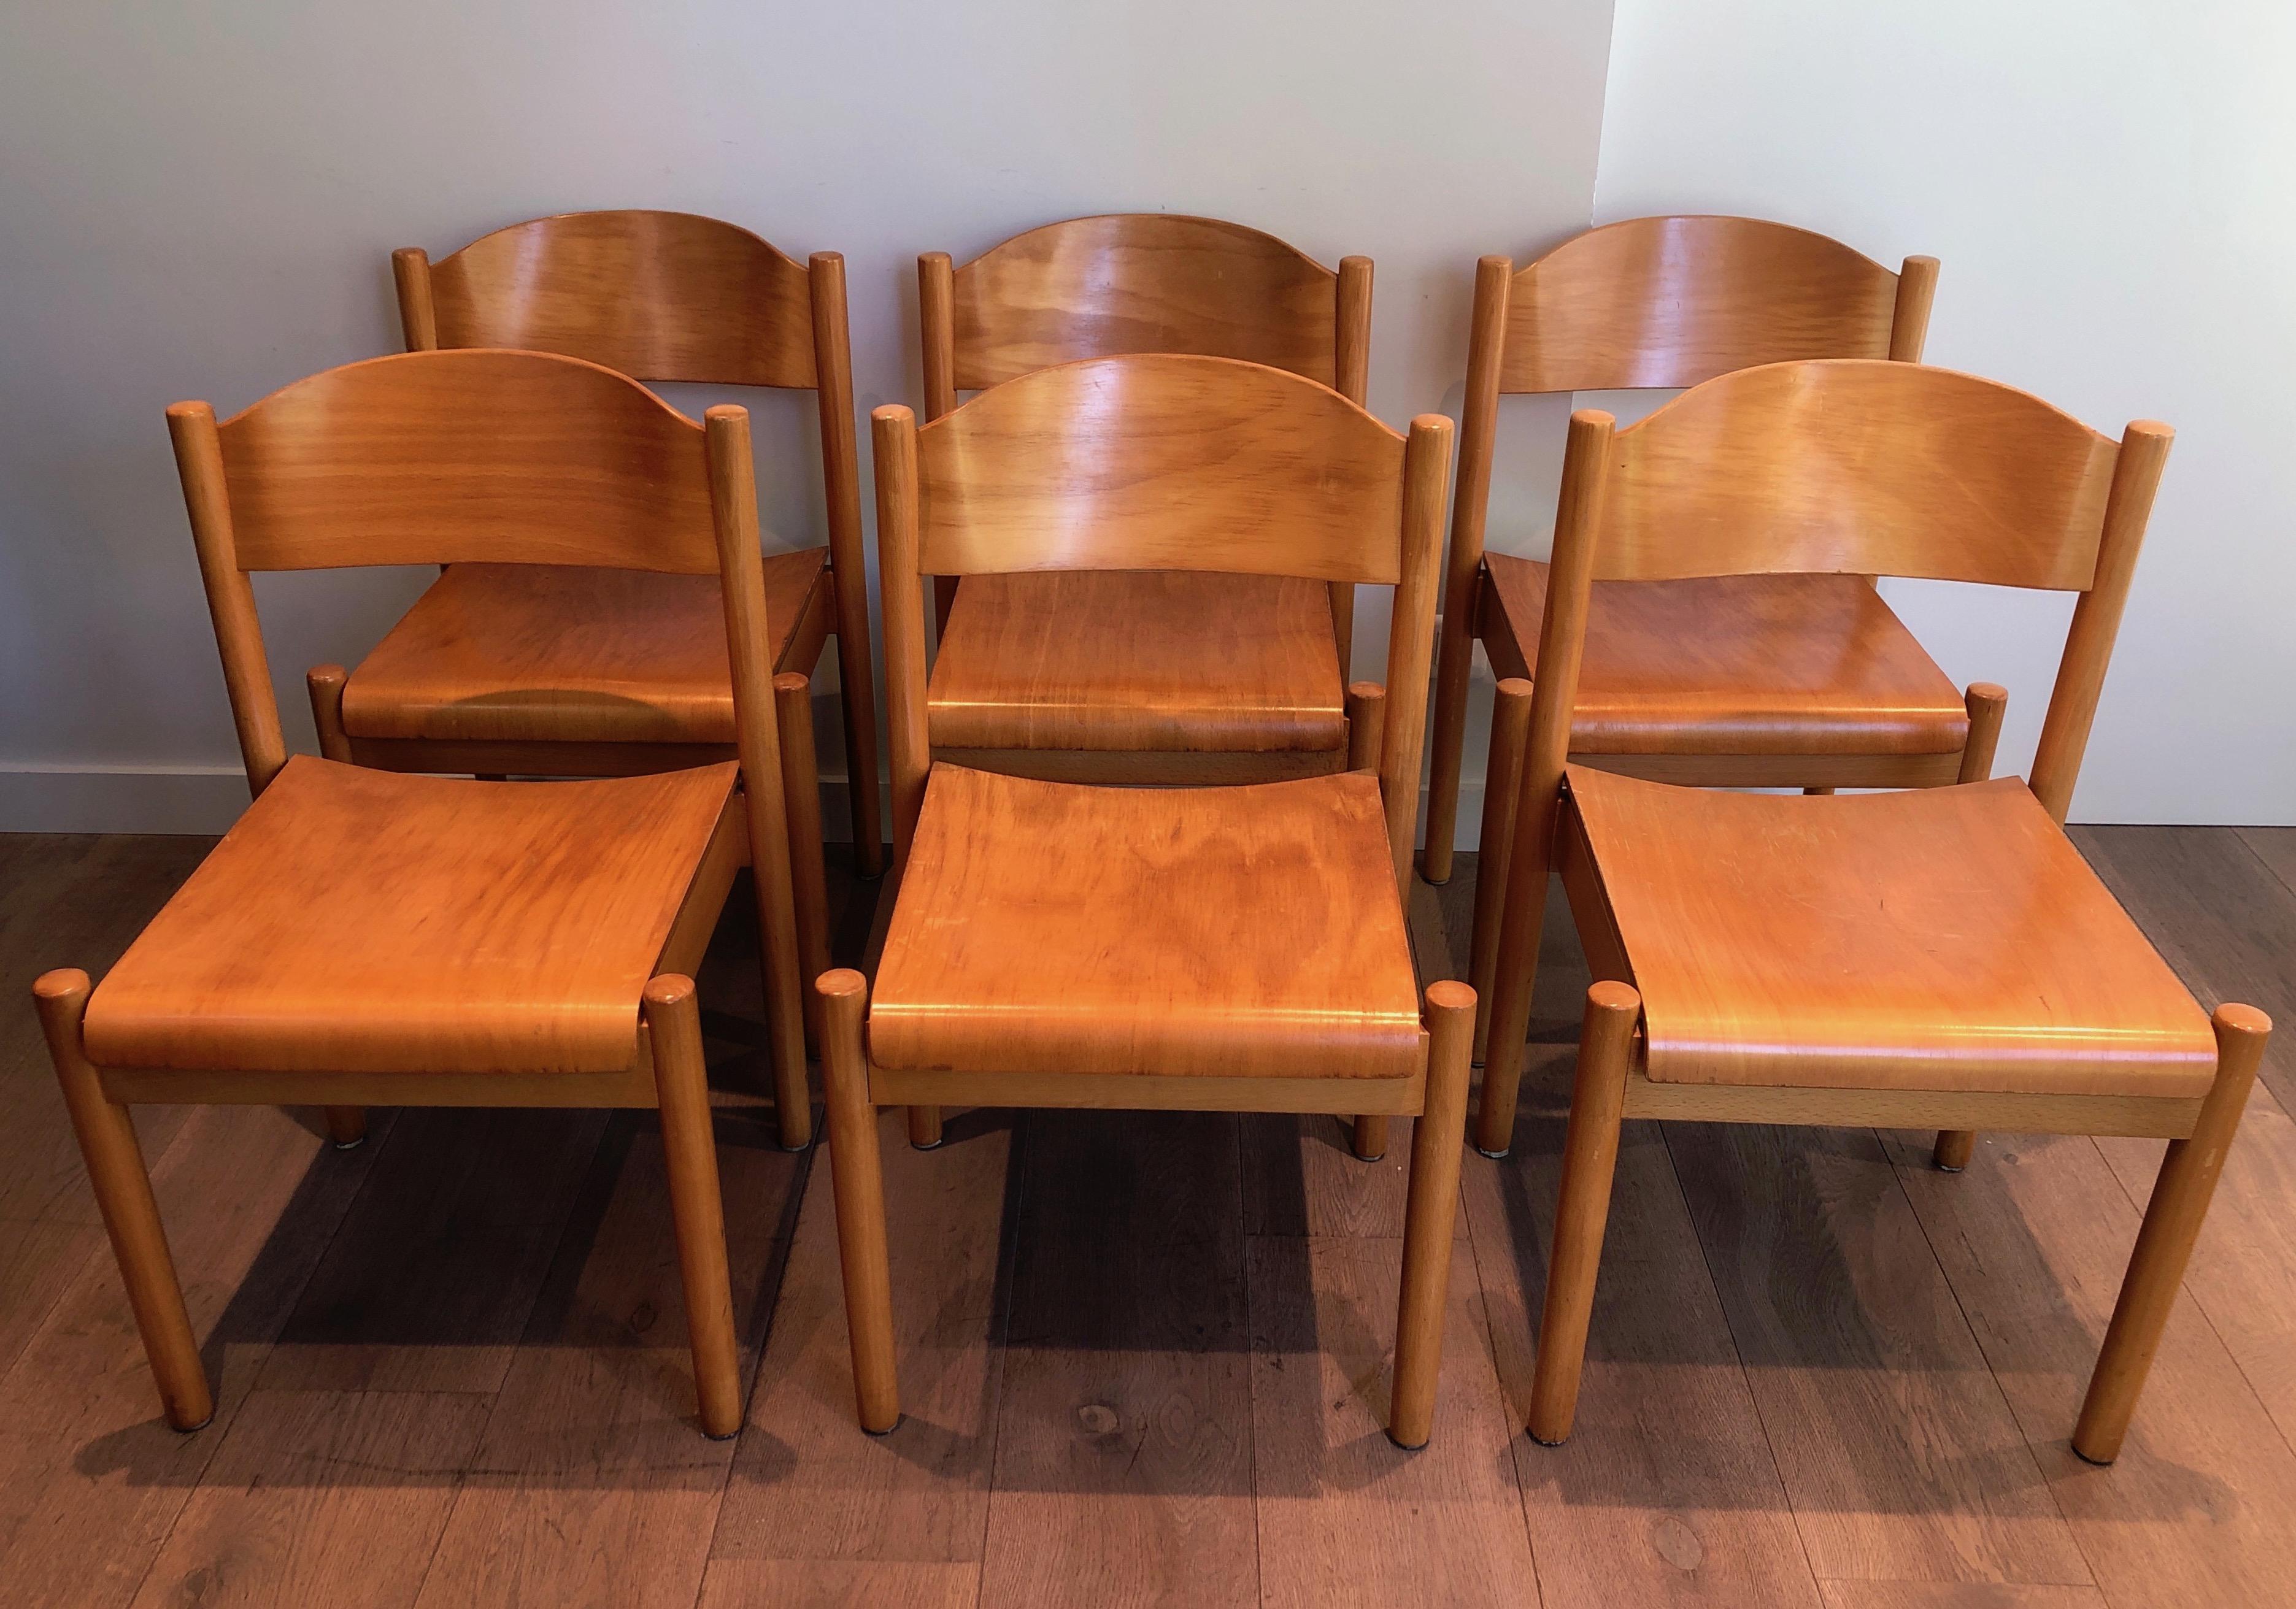 This set of 6 stackable chairs is made of pine. This is a nice work with curved seat and backpart which make these chairs comfortable with a great design. This is German work by Karl Klipper. There is a sticker with information concerning the